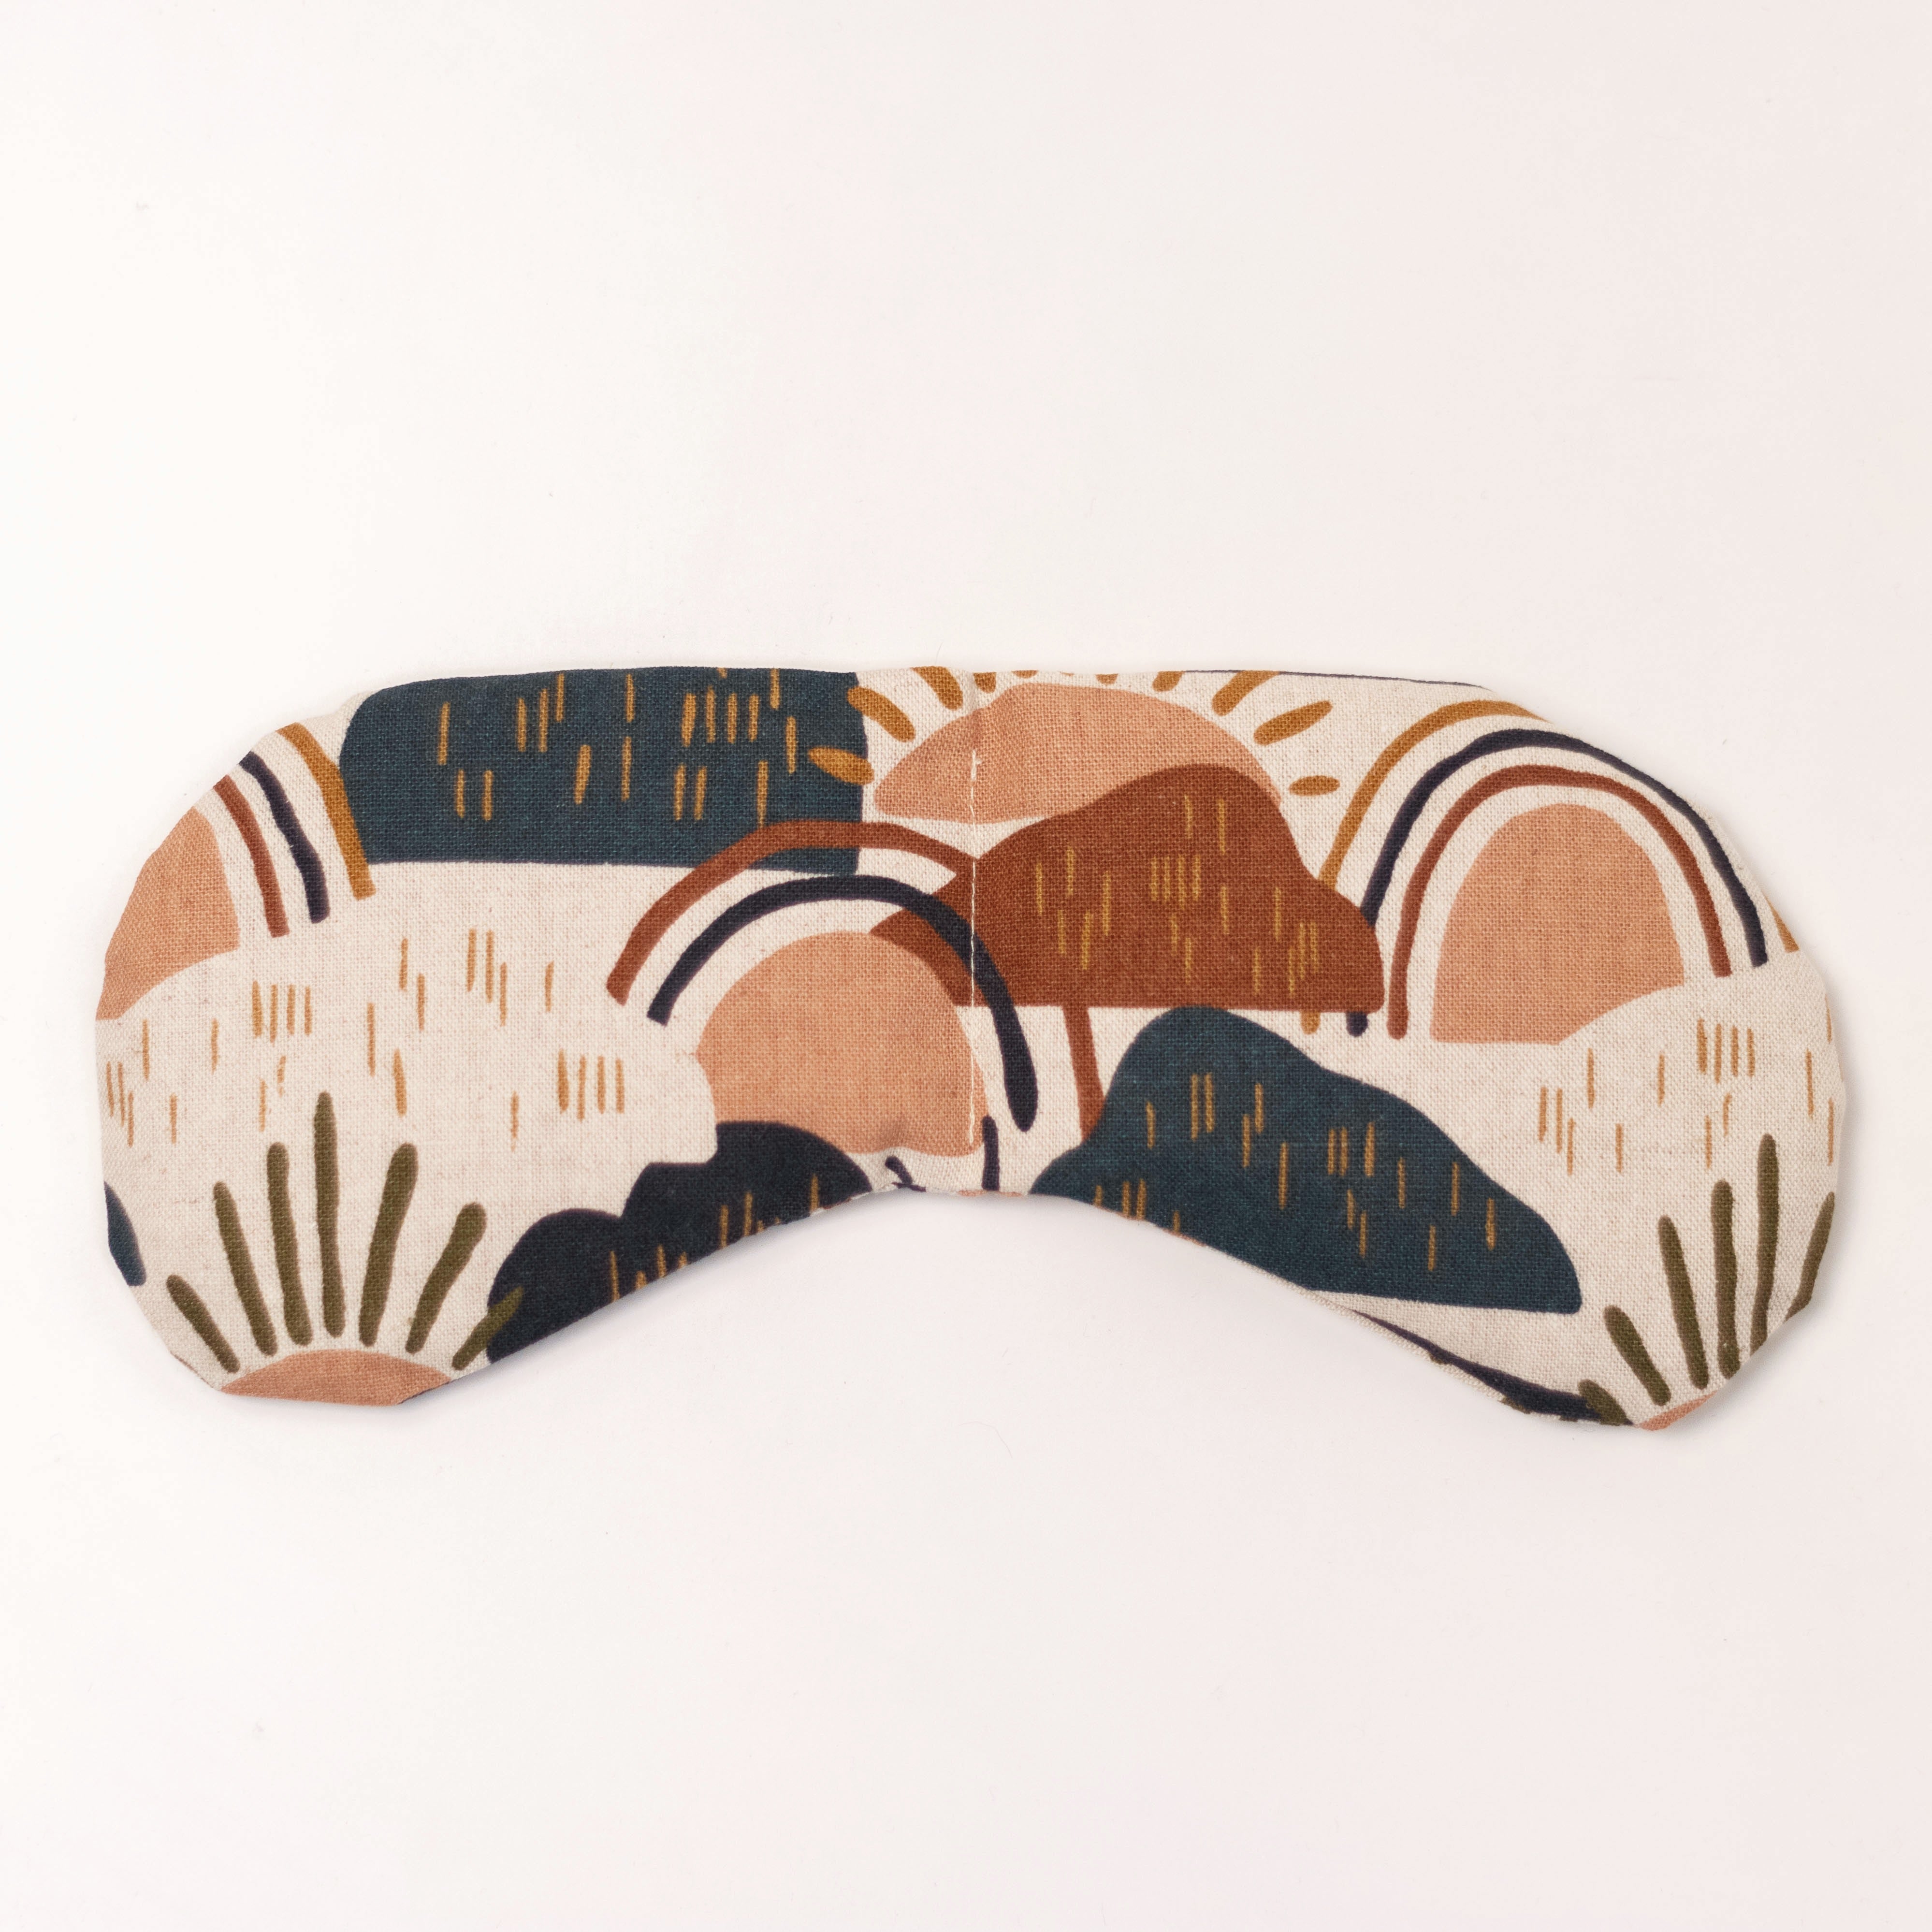 Migraine Mask by Slow North. Strap free cotton weighted eye pillow to be used hot or cold to sooth headaches and tired eyes. Tan, maroon, and navy rainstorm design. White background.